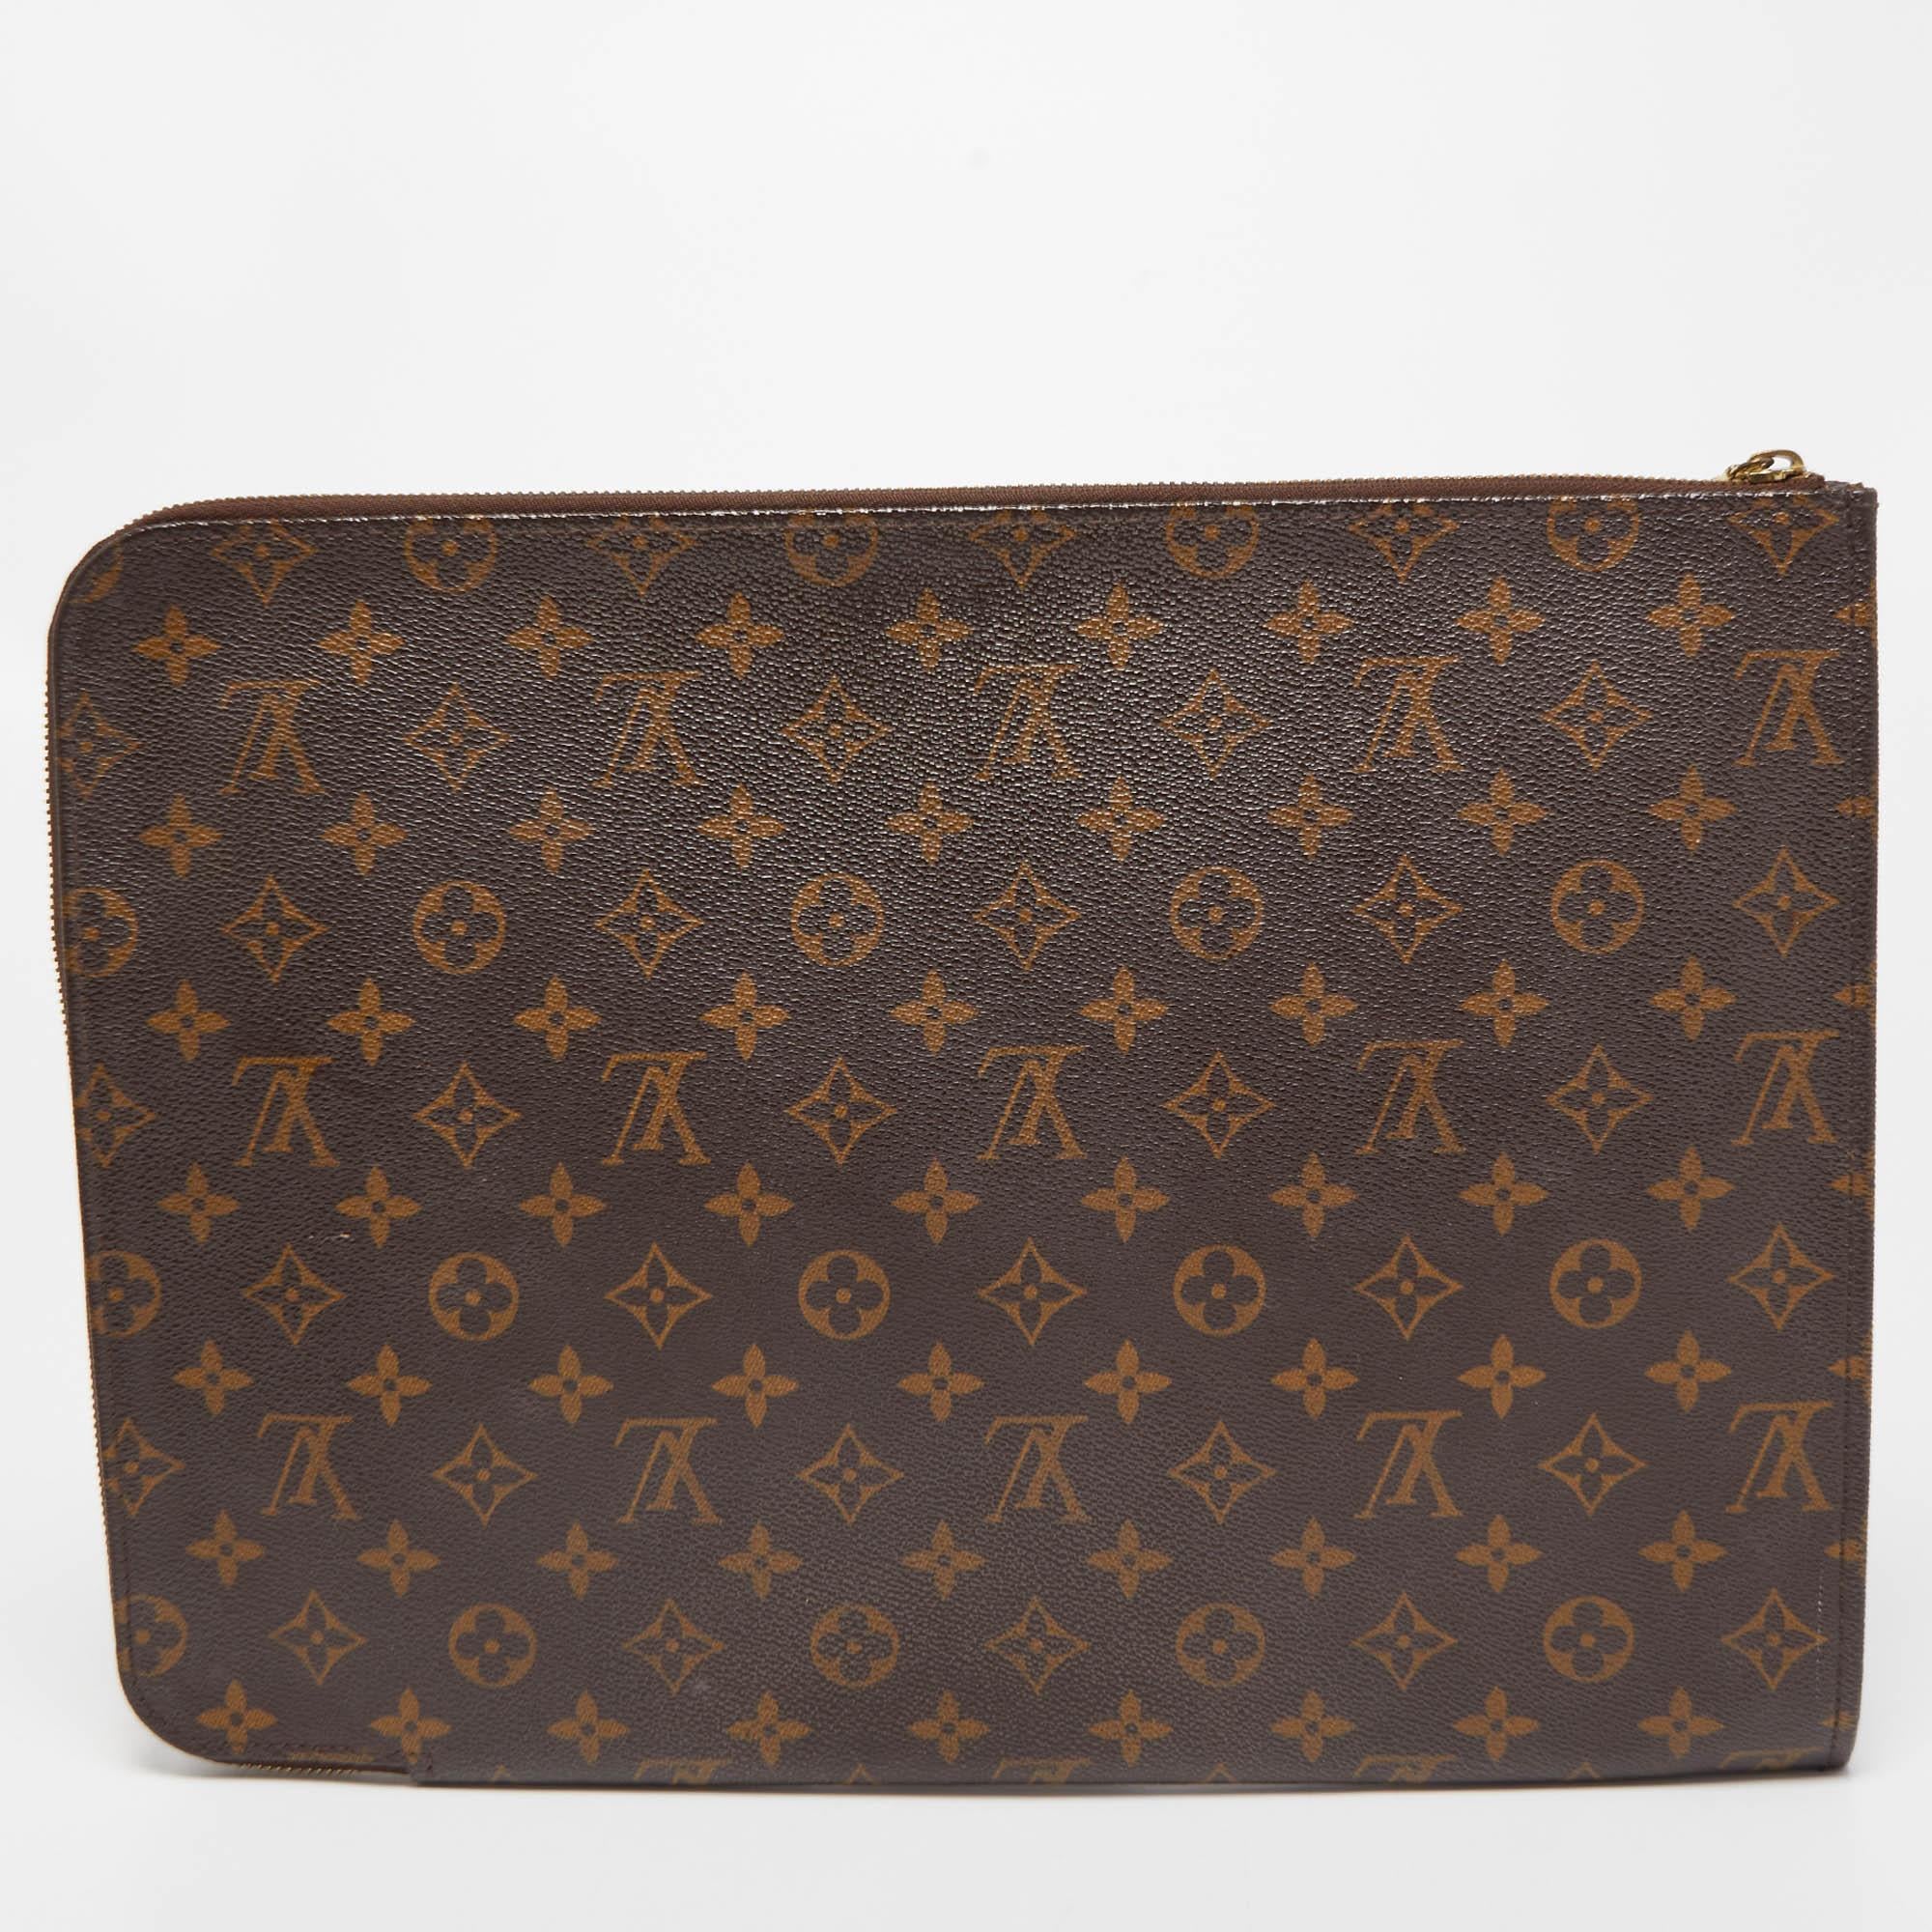 Carry your documents in style with this Louis Vuitton portfolio case. It has a Monogram canvas exterior and a spacious interior secured by a zipper.

